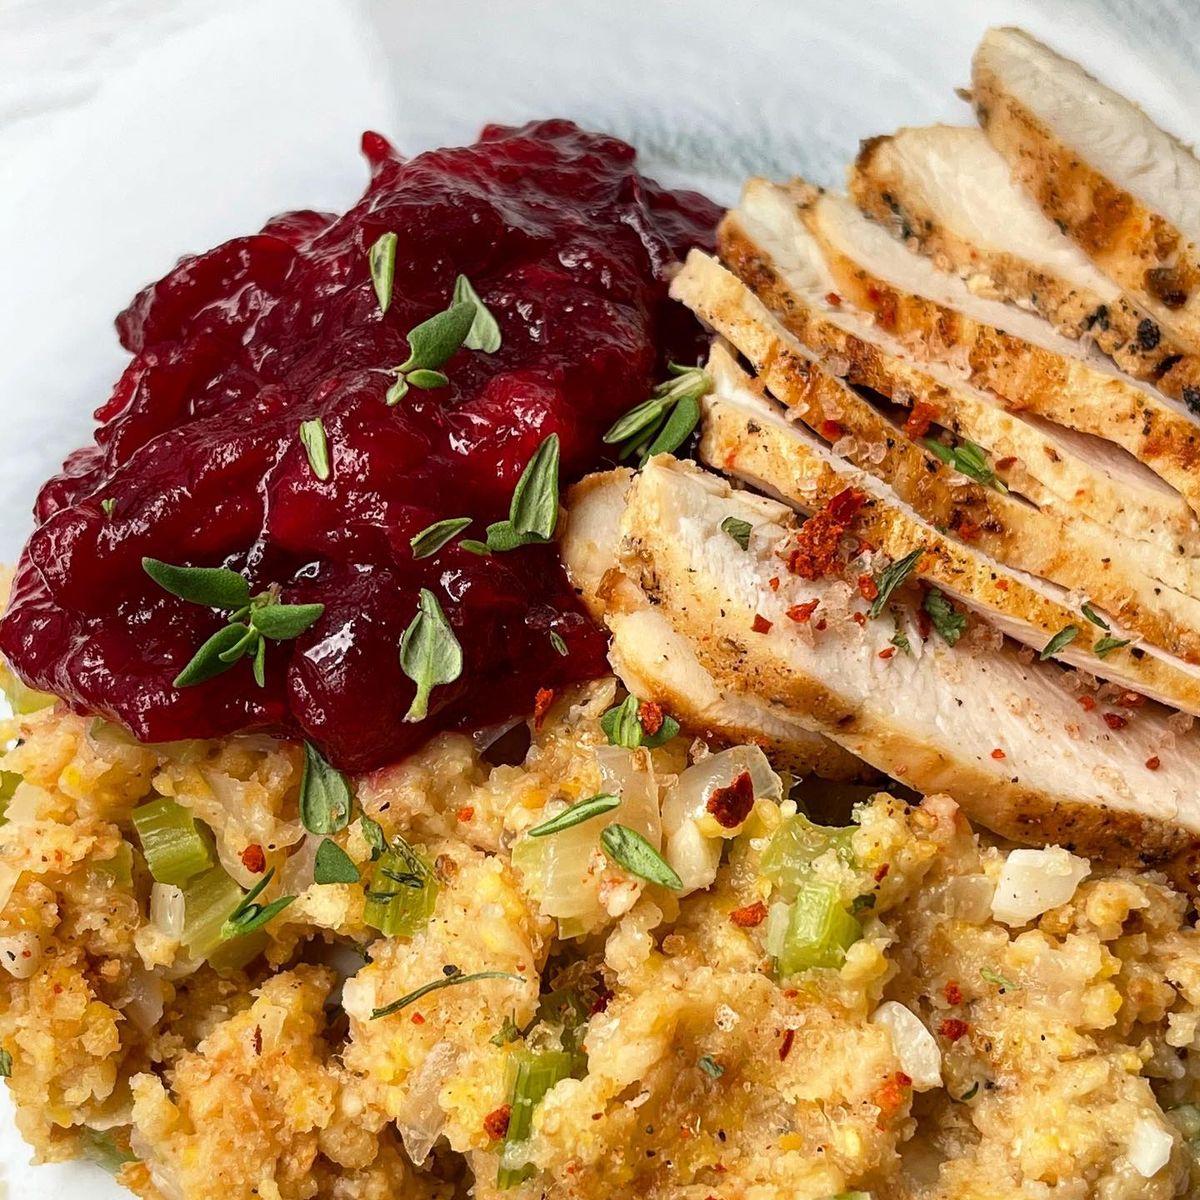 Picture of Cranberry sauce next to rice and chicken on a plate